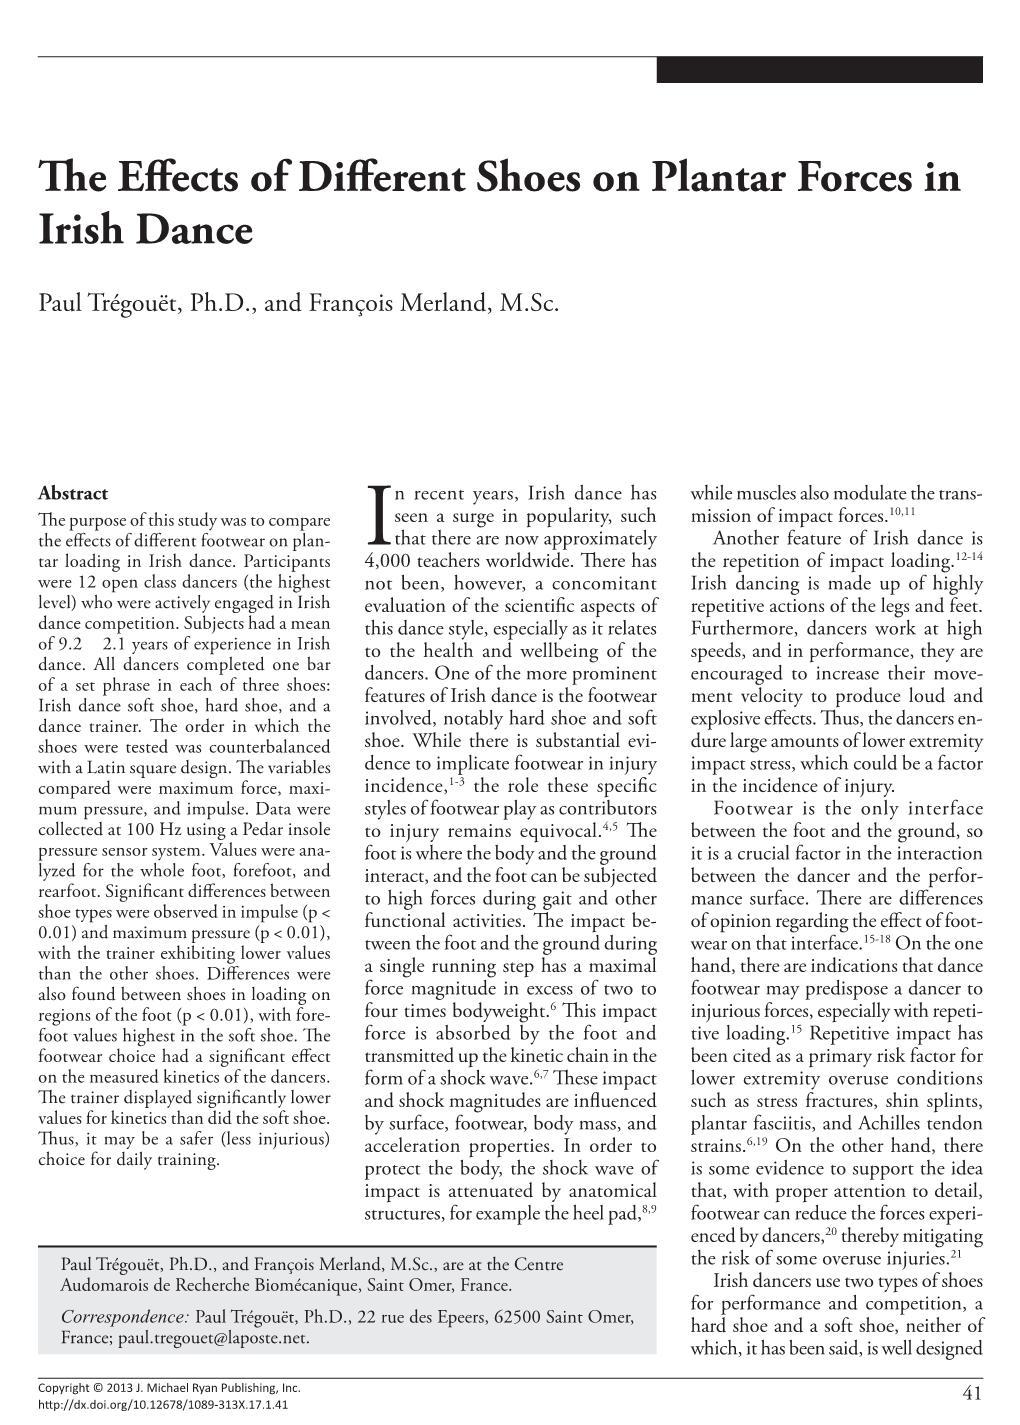 The Effects of Different Shoes on Plantar Forces in Irish Dance